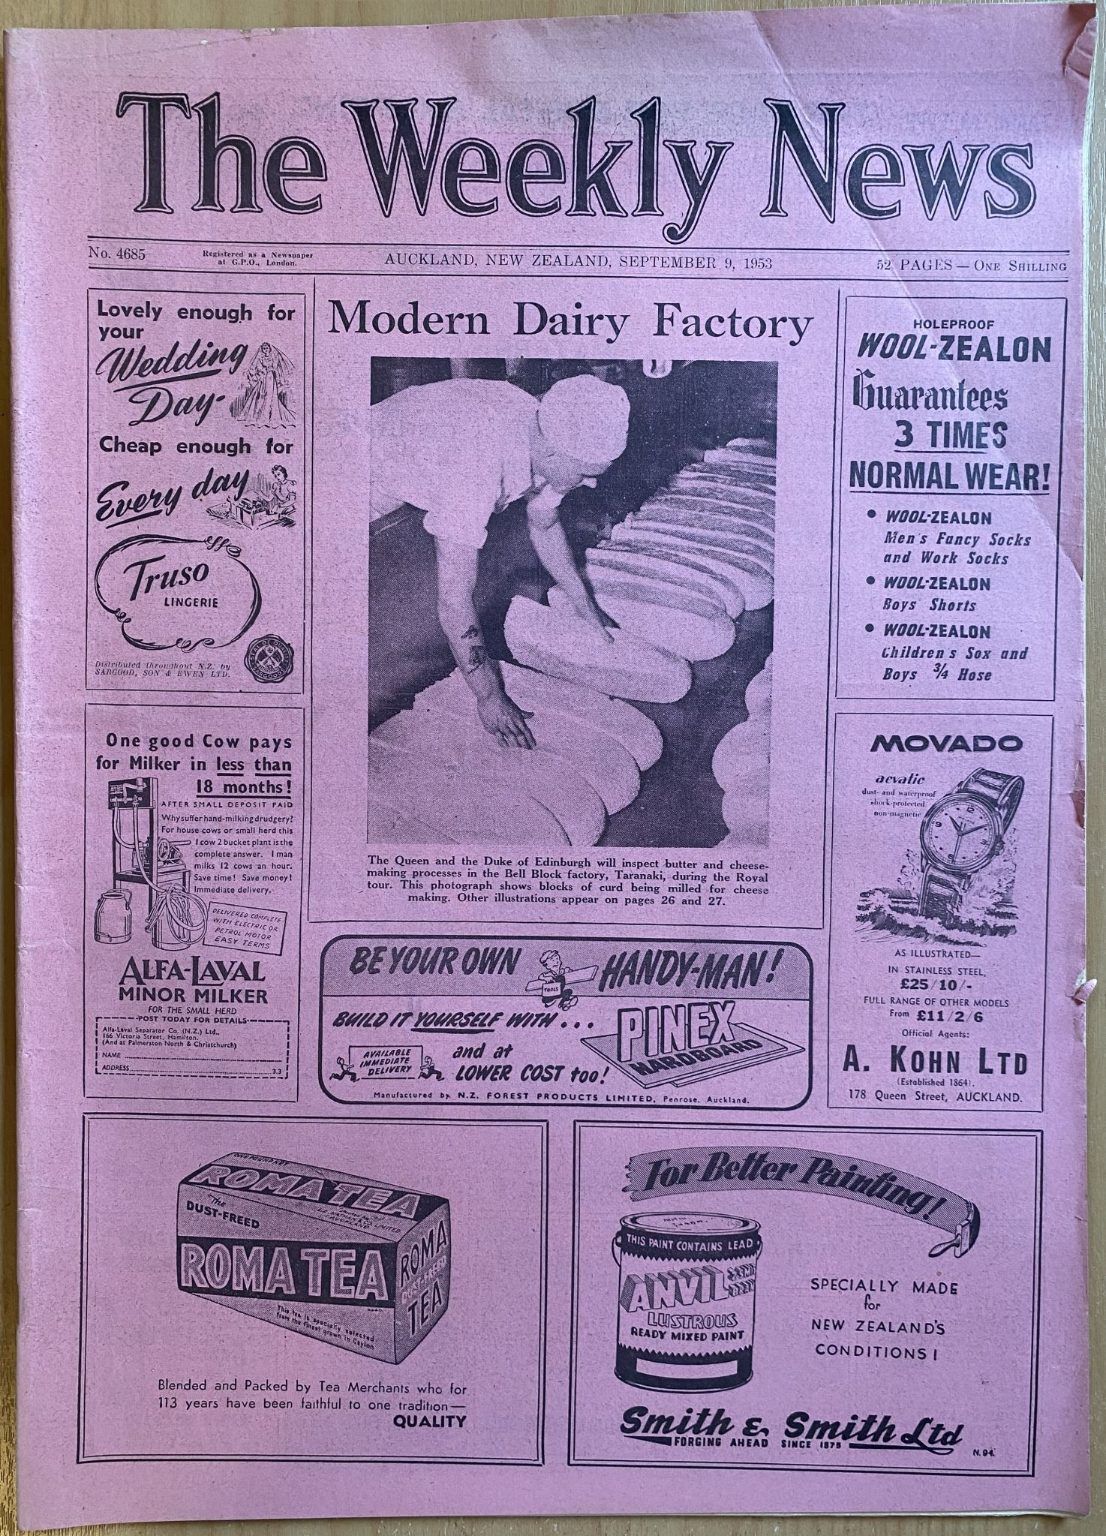 OLD NEWSPAPER: The Weekly News - No. 4685, 9 September 1953